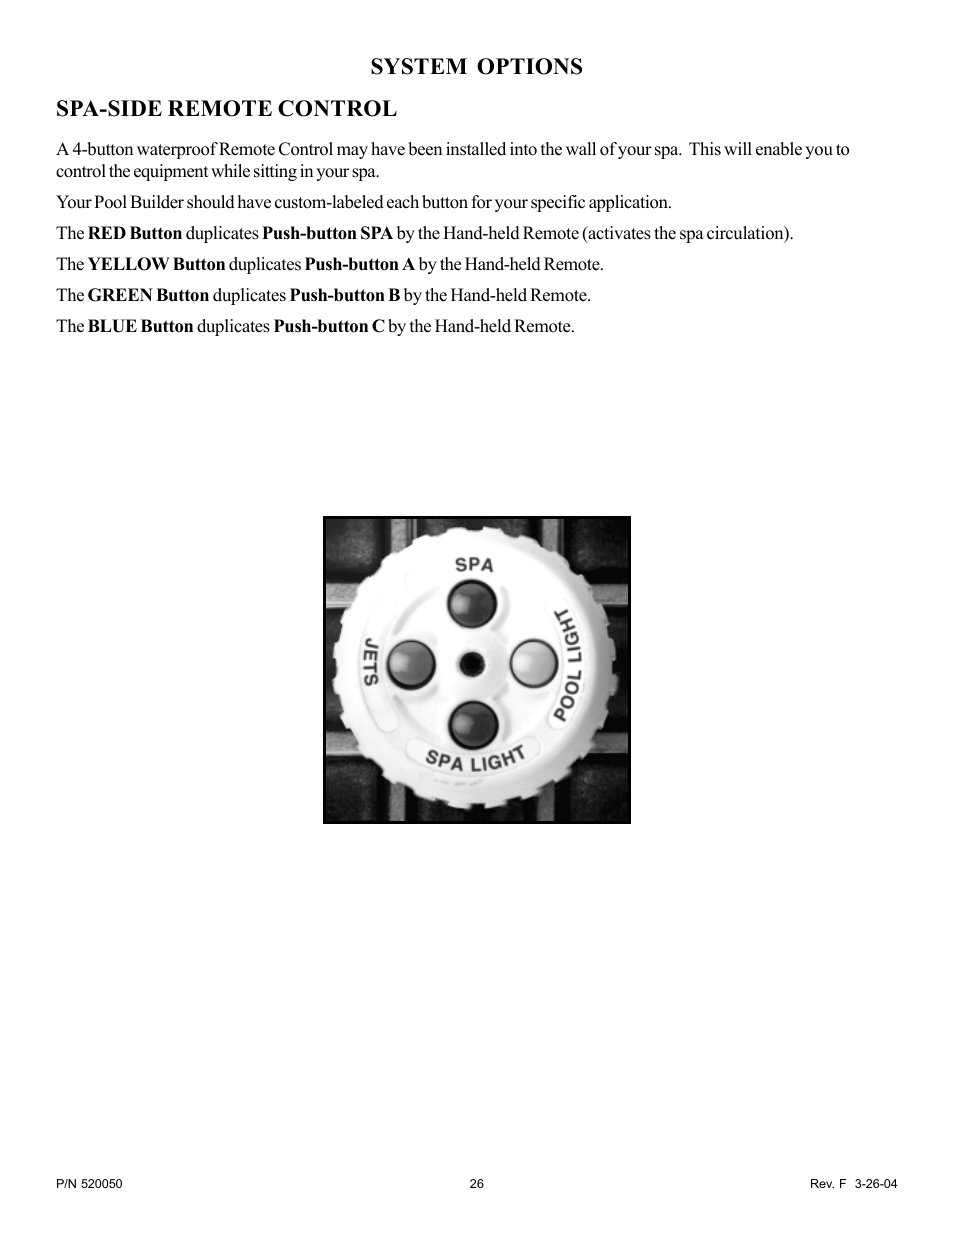 System options spa-side remote control | Pentair EasyTouch Pool/Spa Control System LX-100EZ User Manual | Page 26 / 32